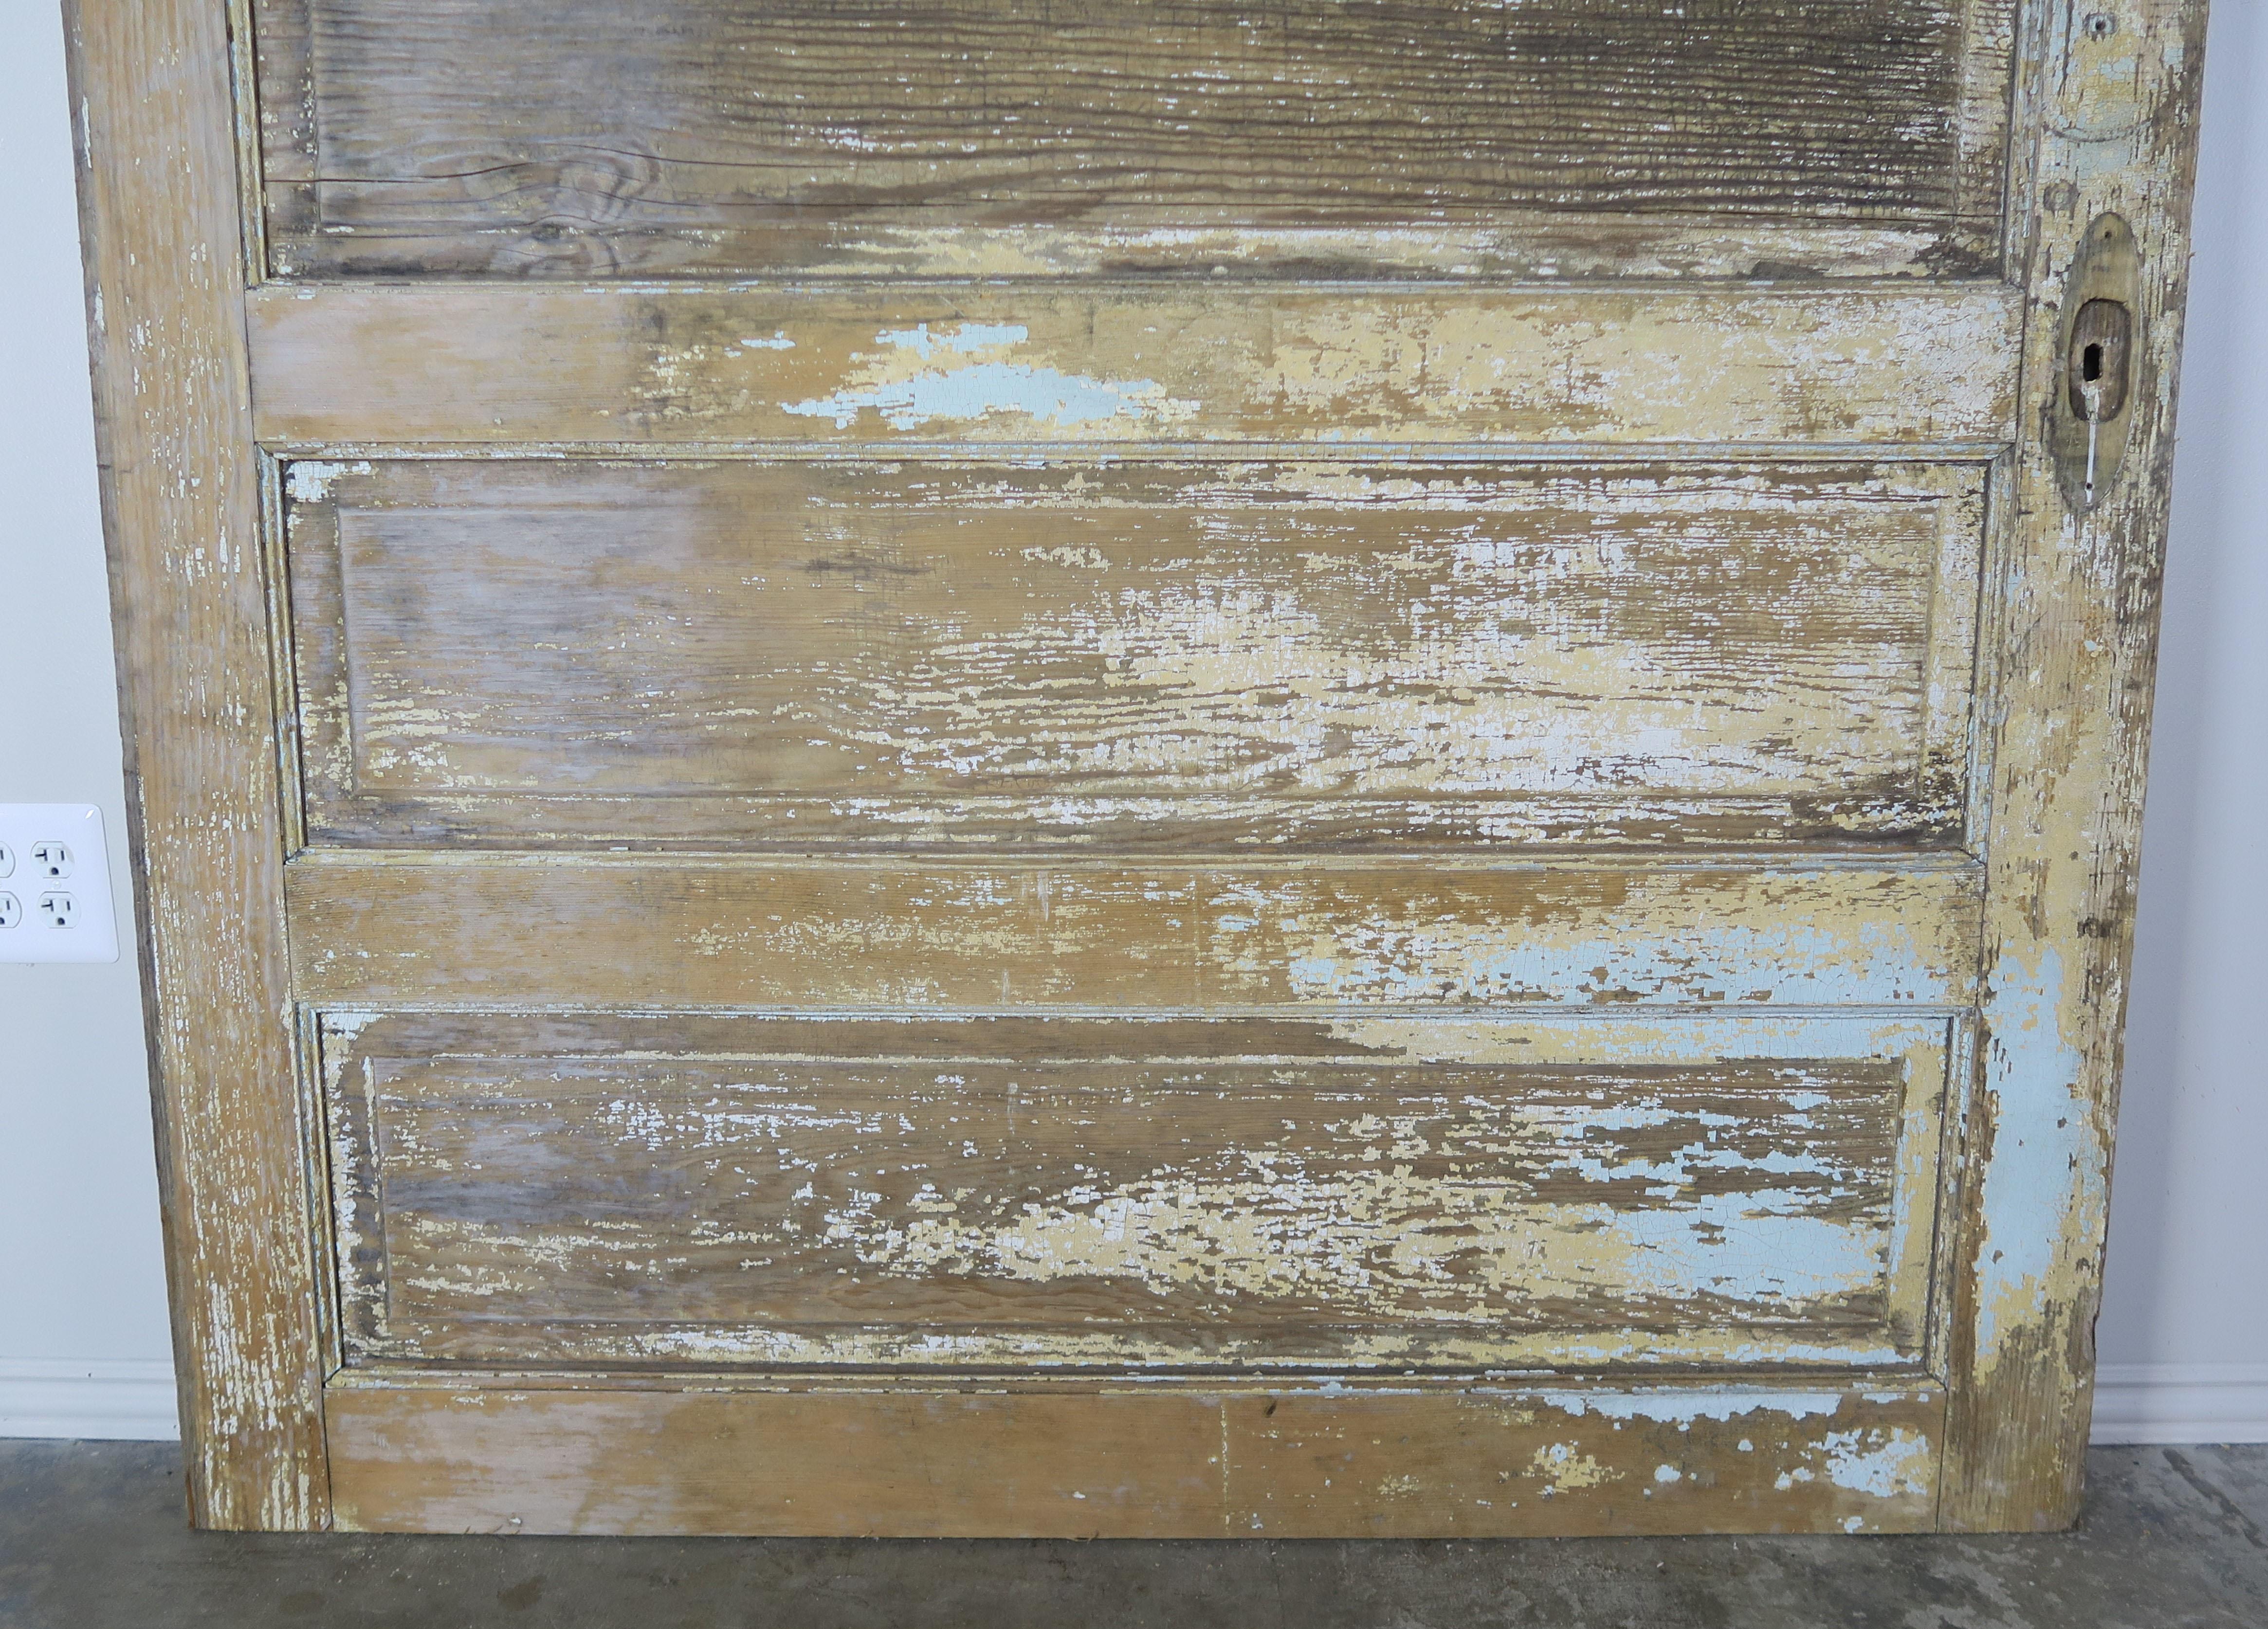 19th century French painted barn door with beautiful worn distressed finish. Cream, blue and remnants of ochre colored paint are seen throughout this fabulous door. It would make a great room divider that easily slides open to produce one large